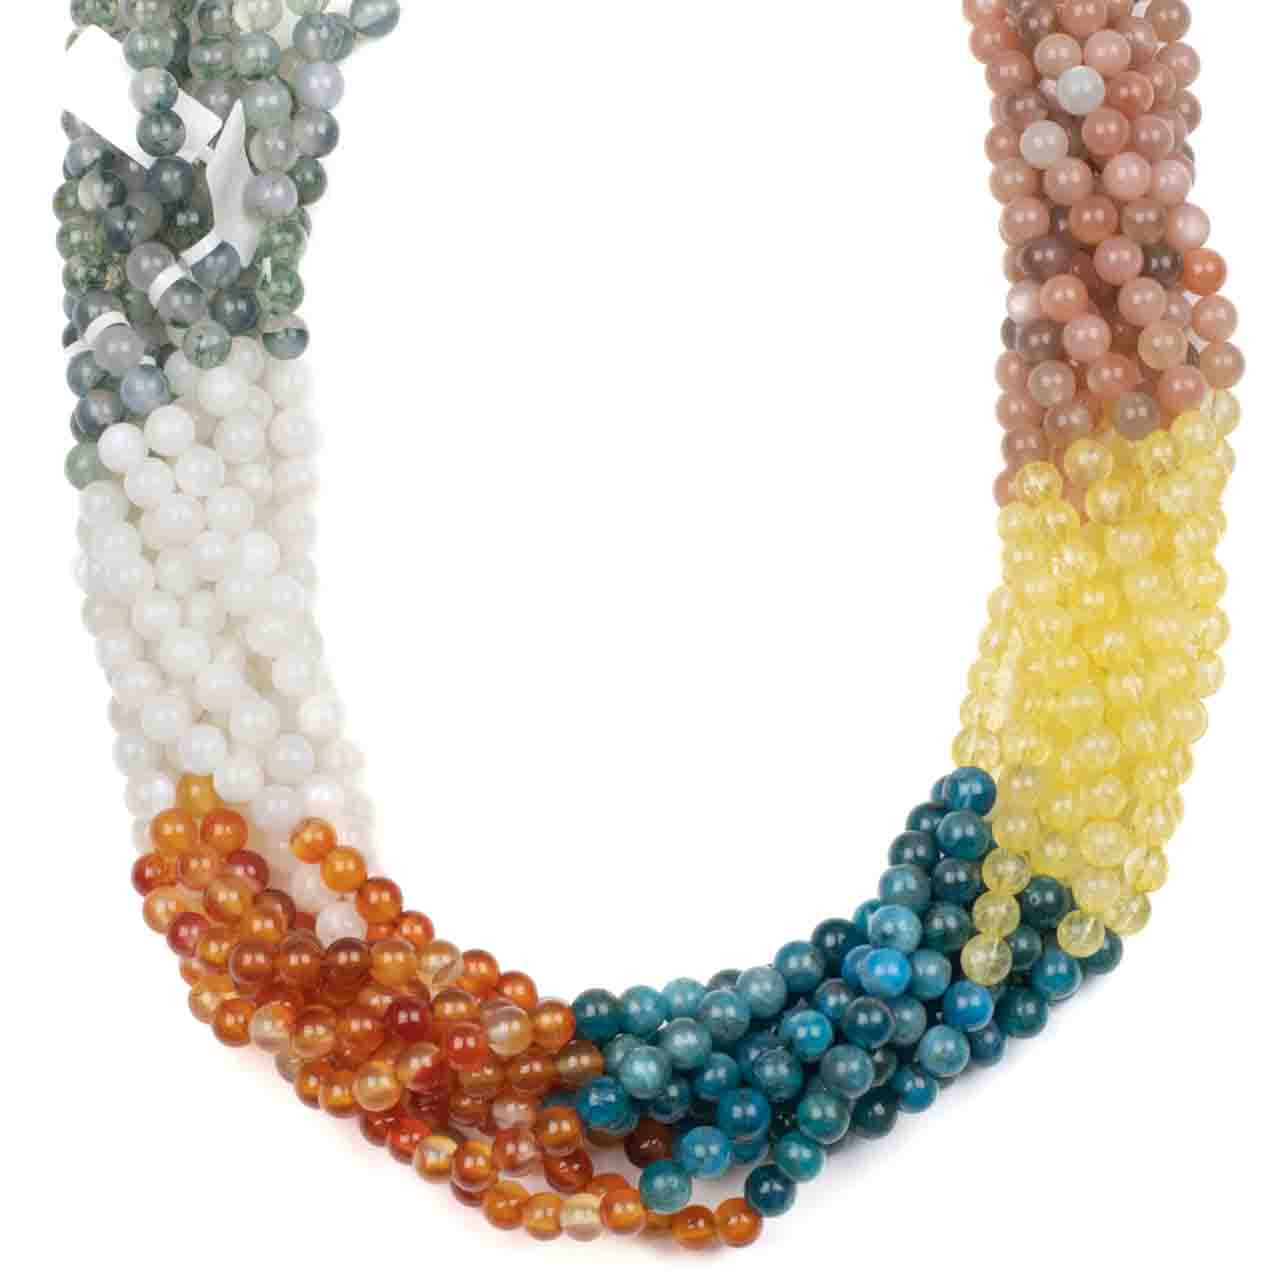 Faceted 4mm Agate Gemstone Round Beads, 15 Strand, Approx. 85